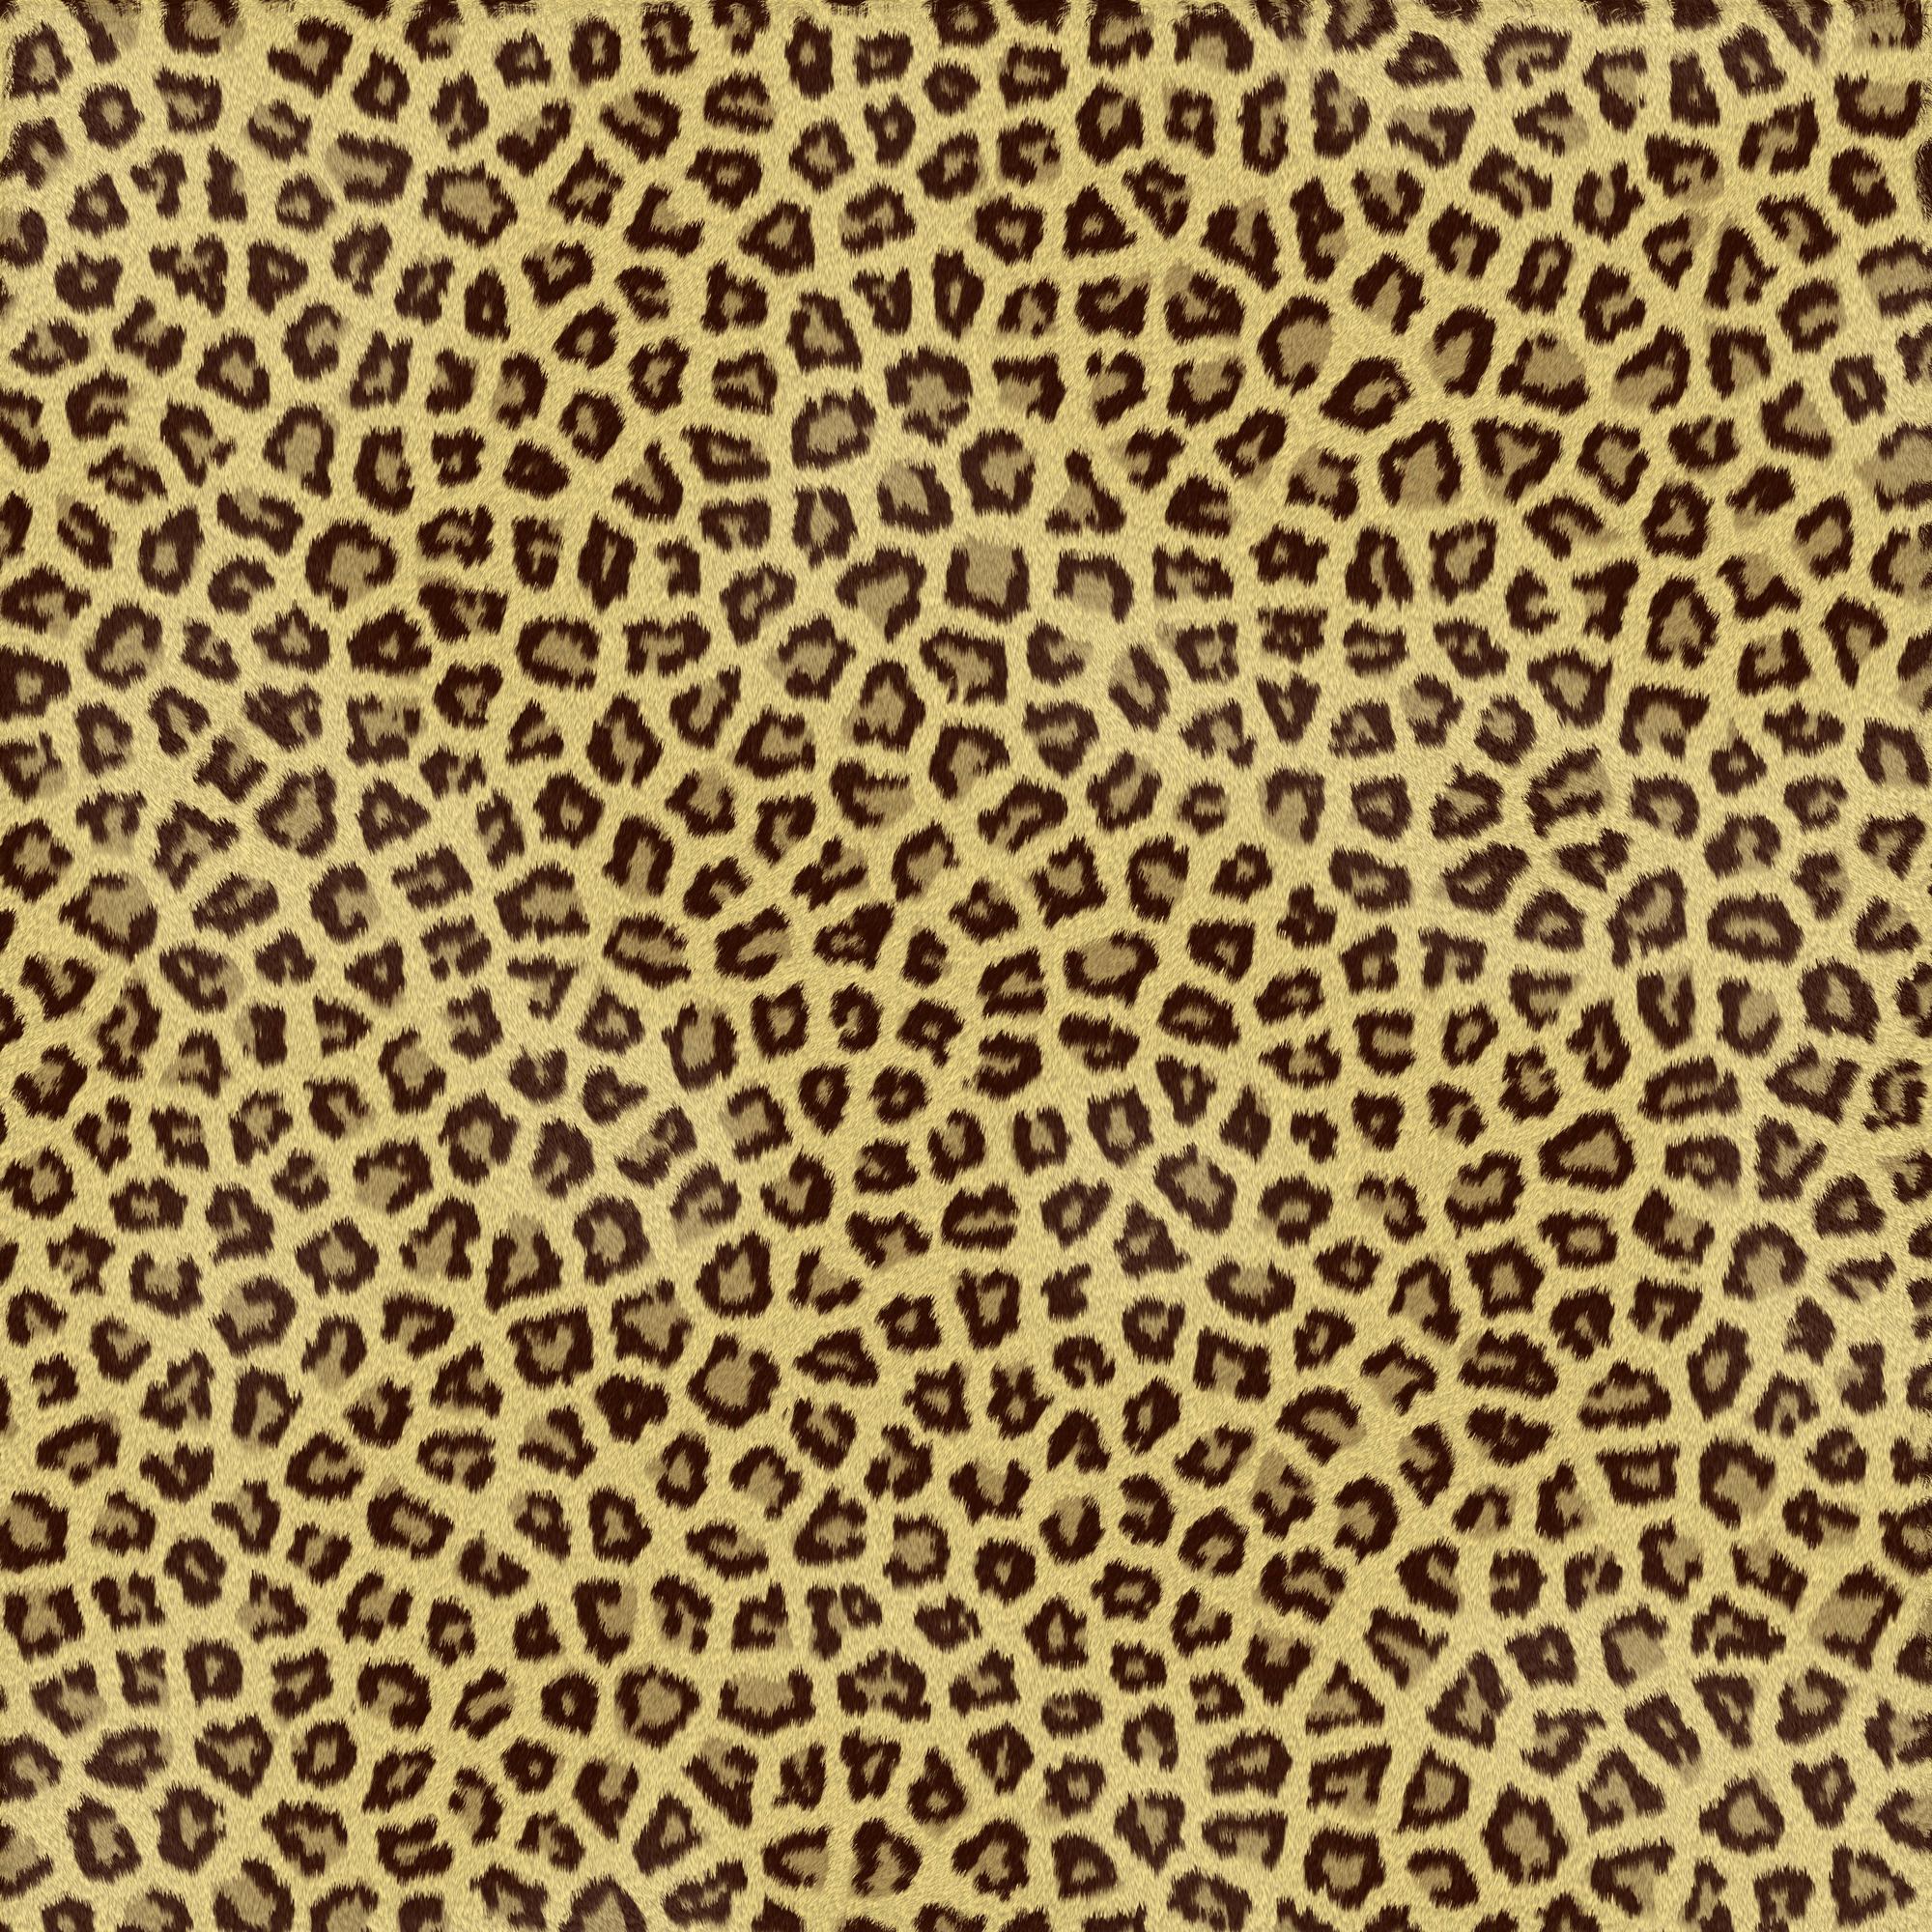 Great Seamless Image for a Fur texture or Fur Background